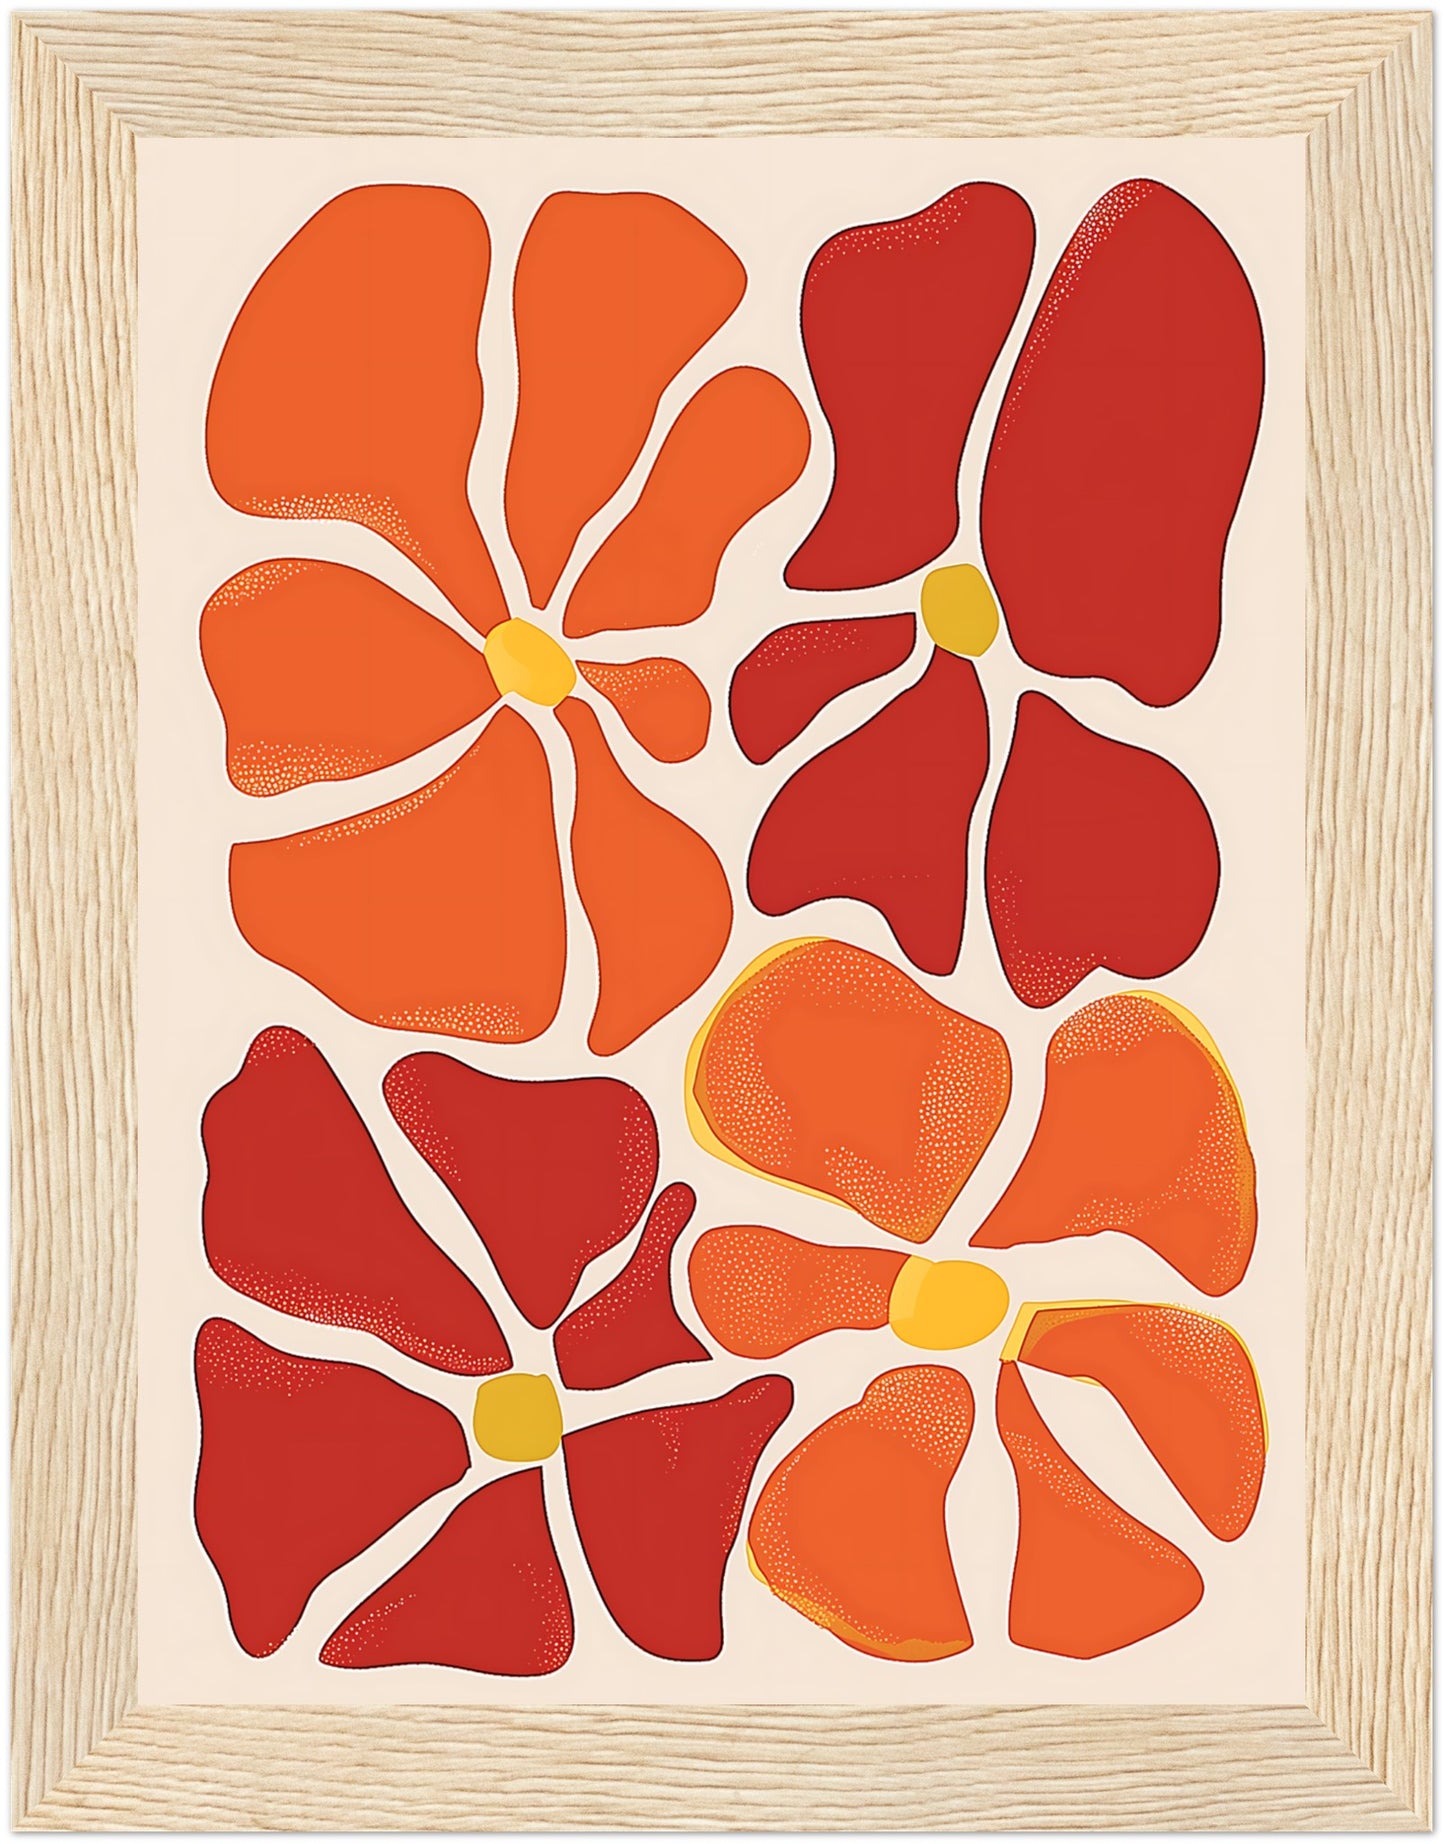 Abstract artwork with a pattern of red and orange flower-like shapes on a light background, framed.